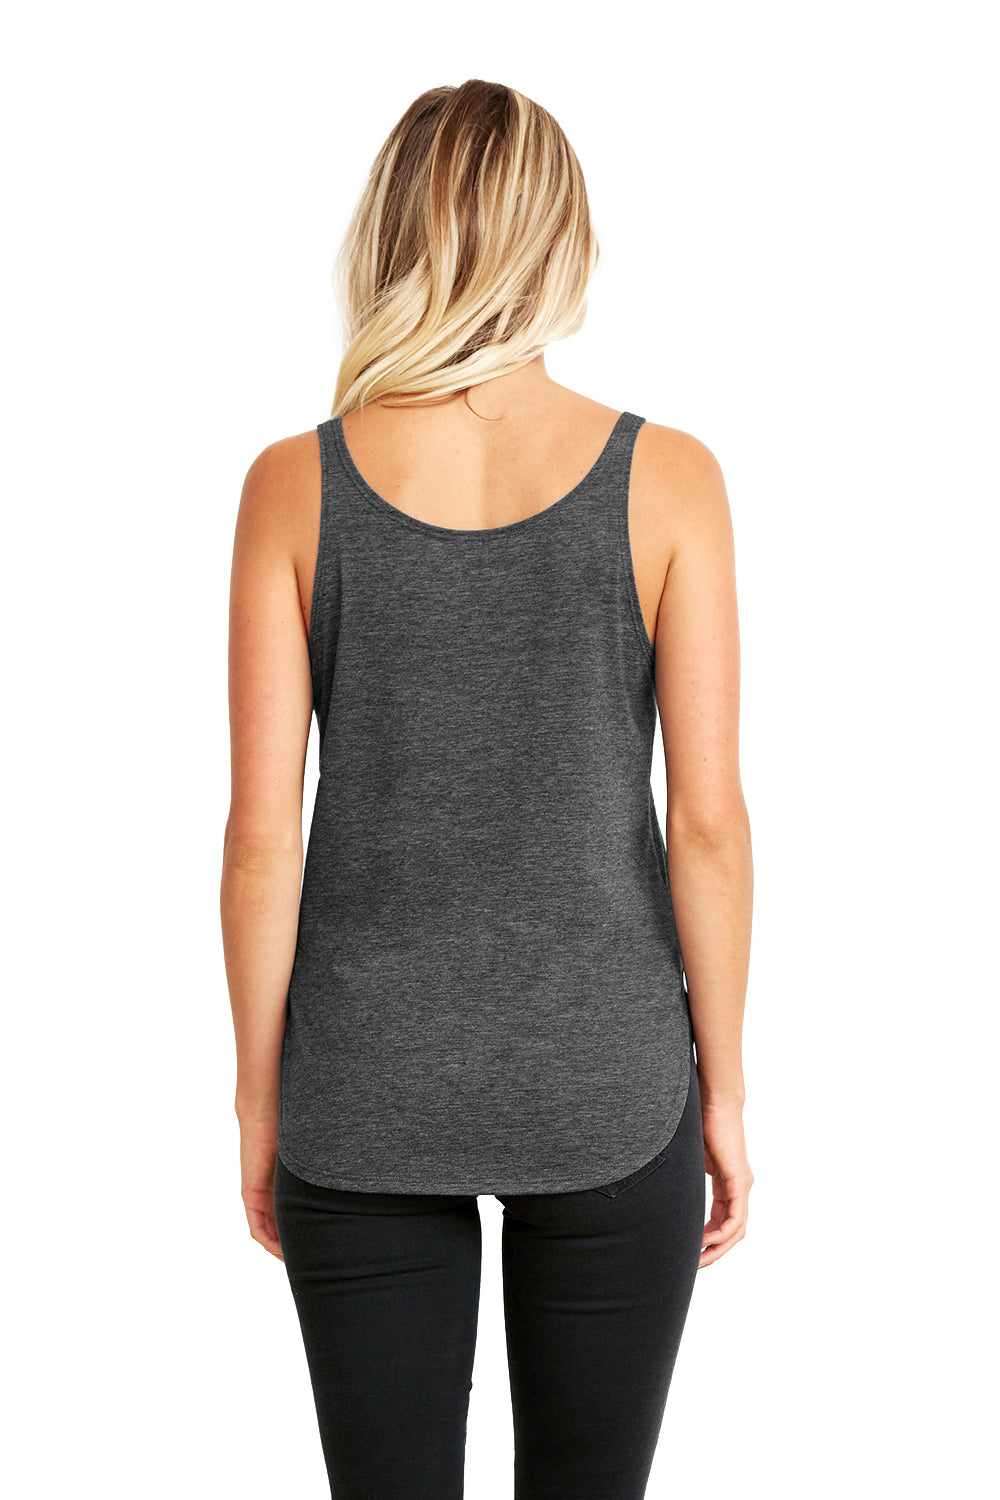 Next Level 5033 Womens Festival Tank Top Charcoal Grey Back